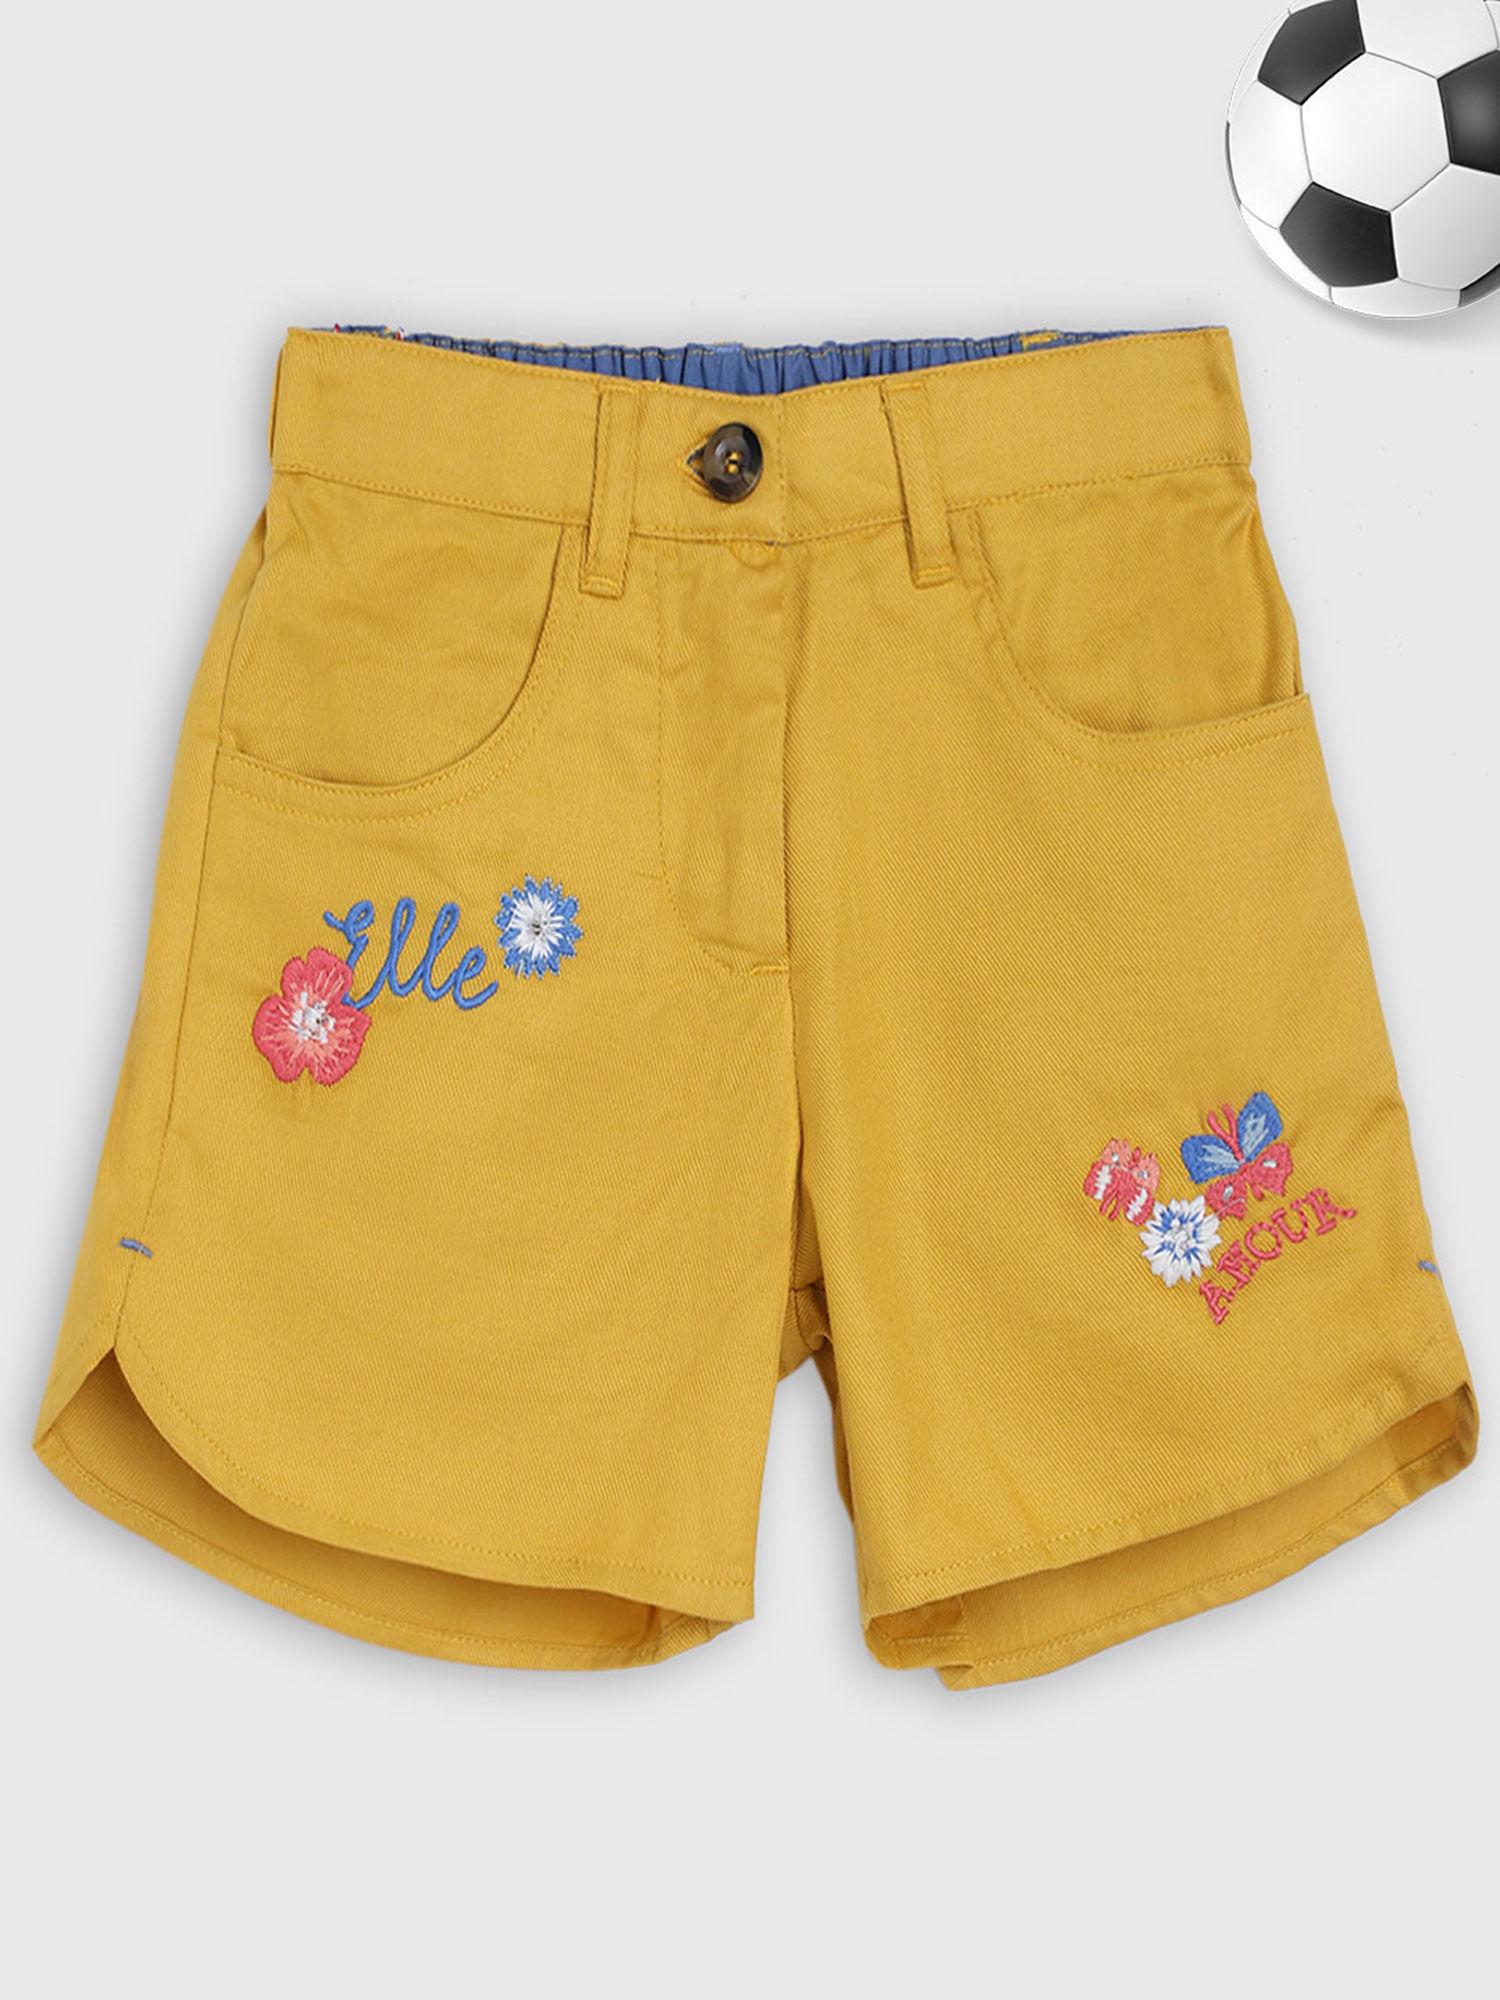 yellow solid regular fit shorts